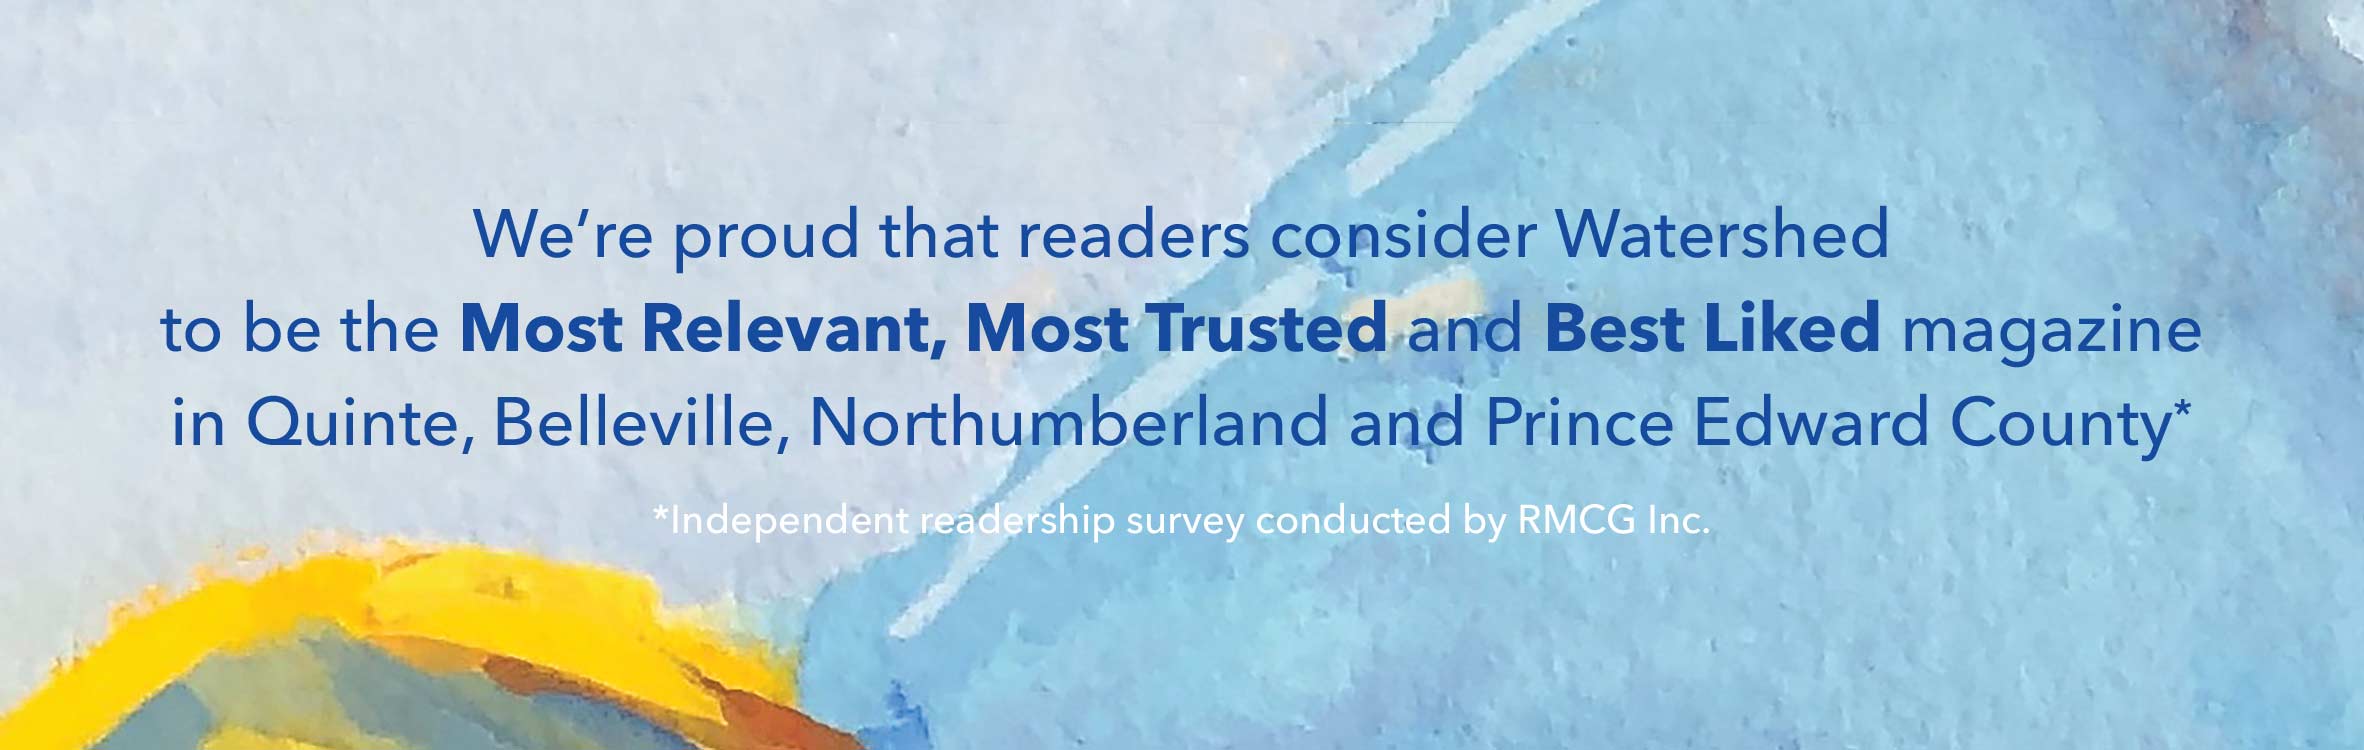 We're proud that readers consider Watershed to be the Most Relevant, Most Trusted and Best Liked magazine in Quinte, Belleville, Northumberland and Prince Edward County